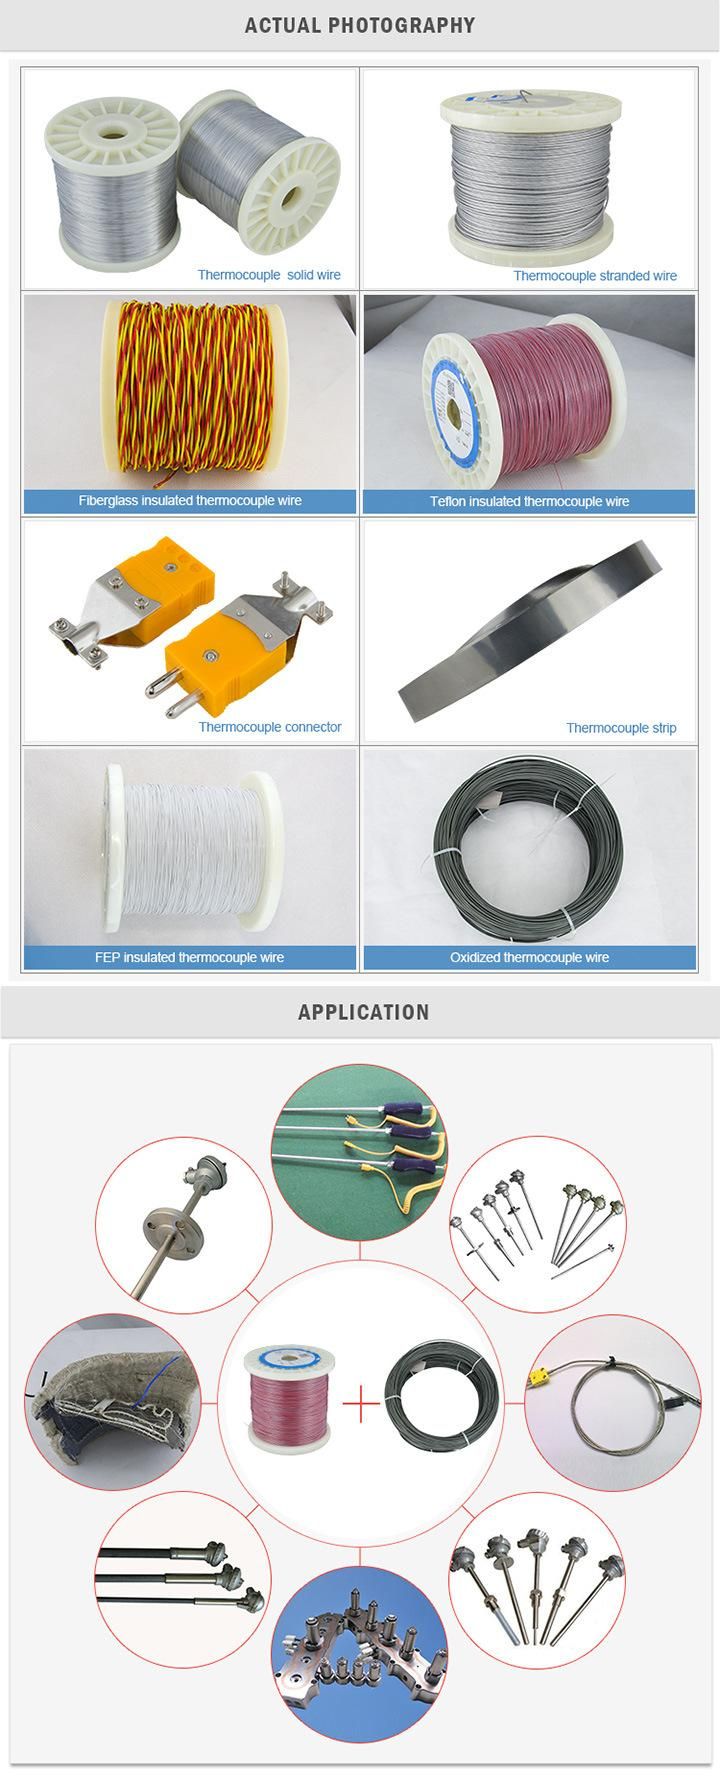 Thermocouple wire with high silica fiber glass insulation 800 to 1000 degree (KPX KNX)